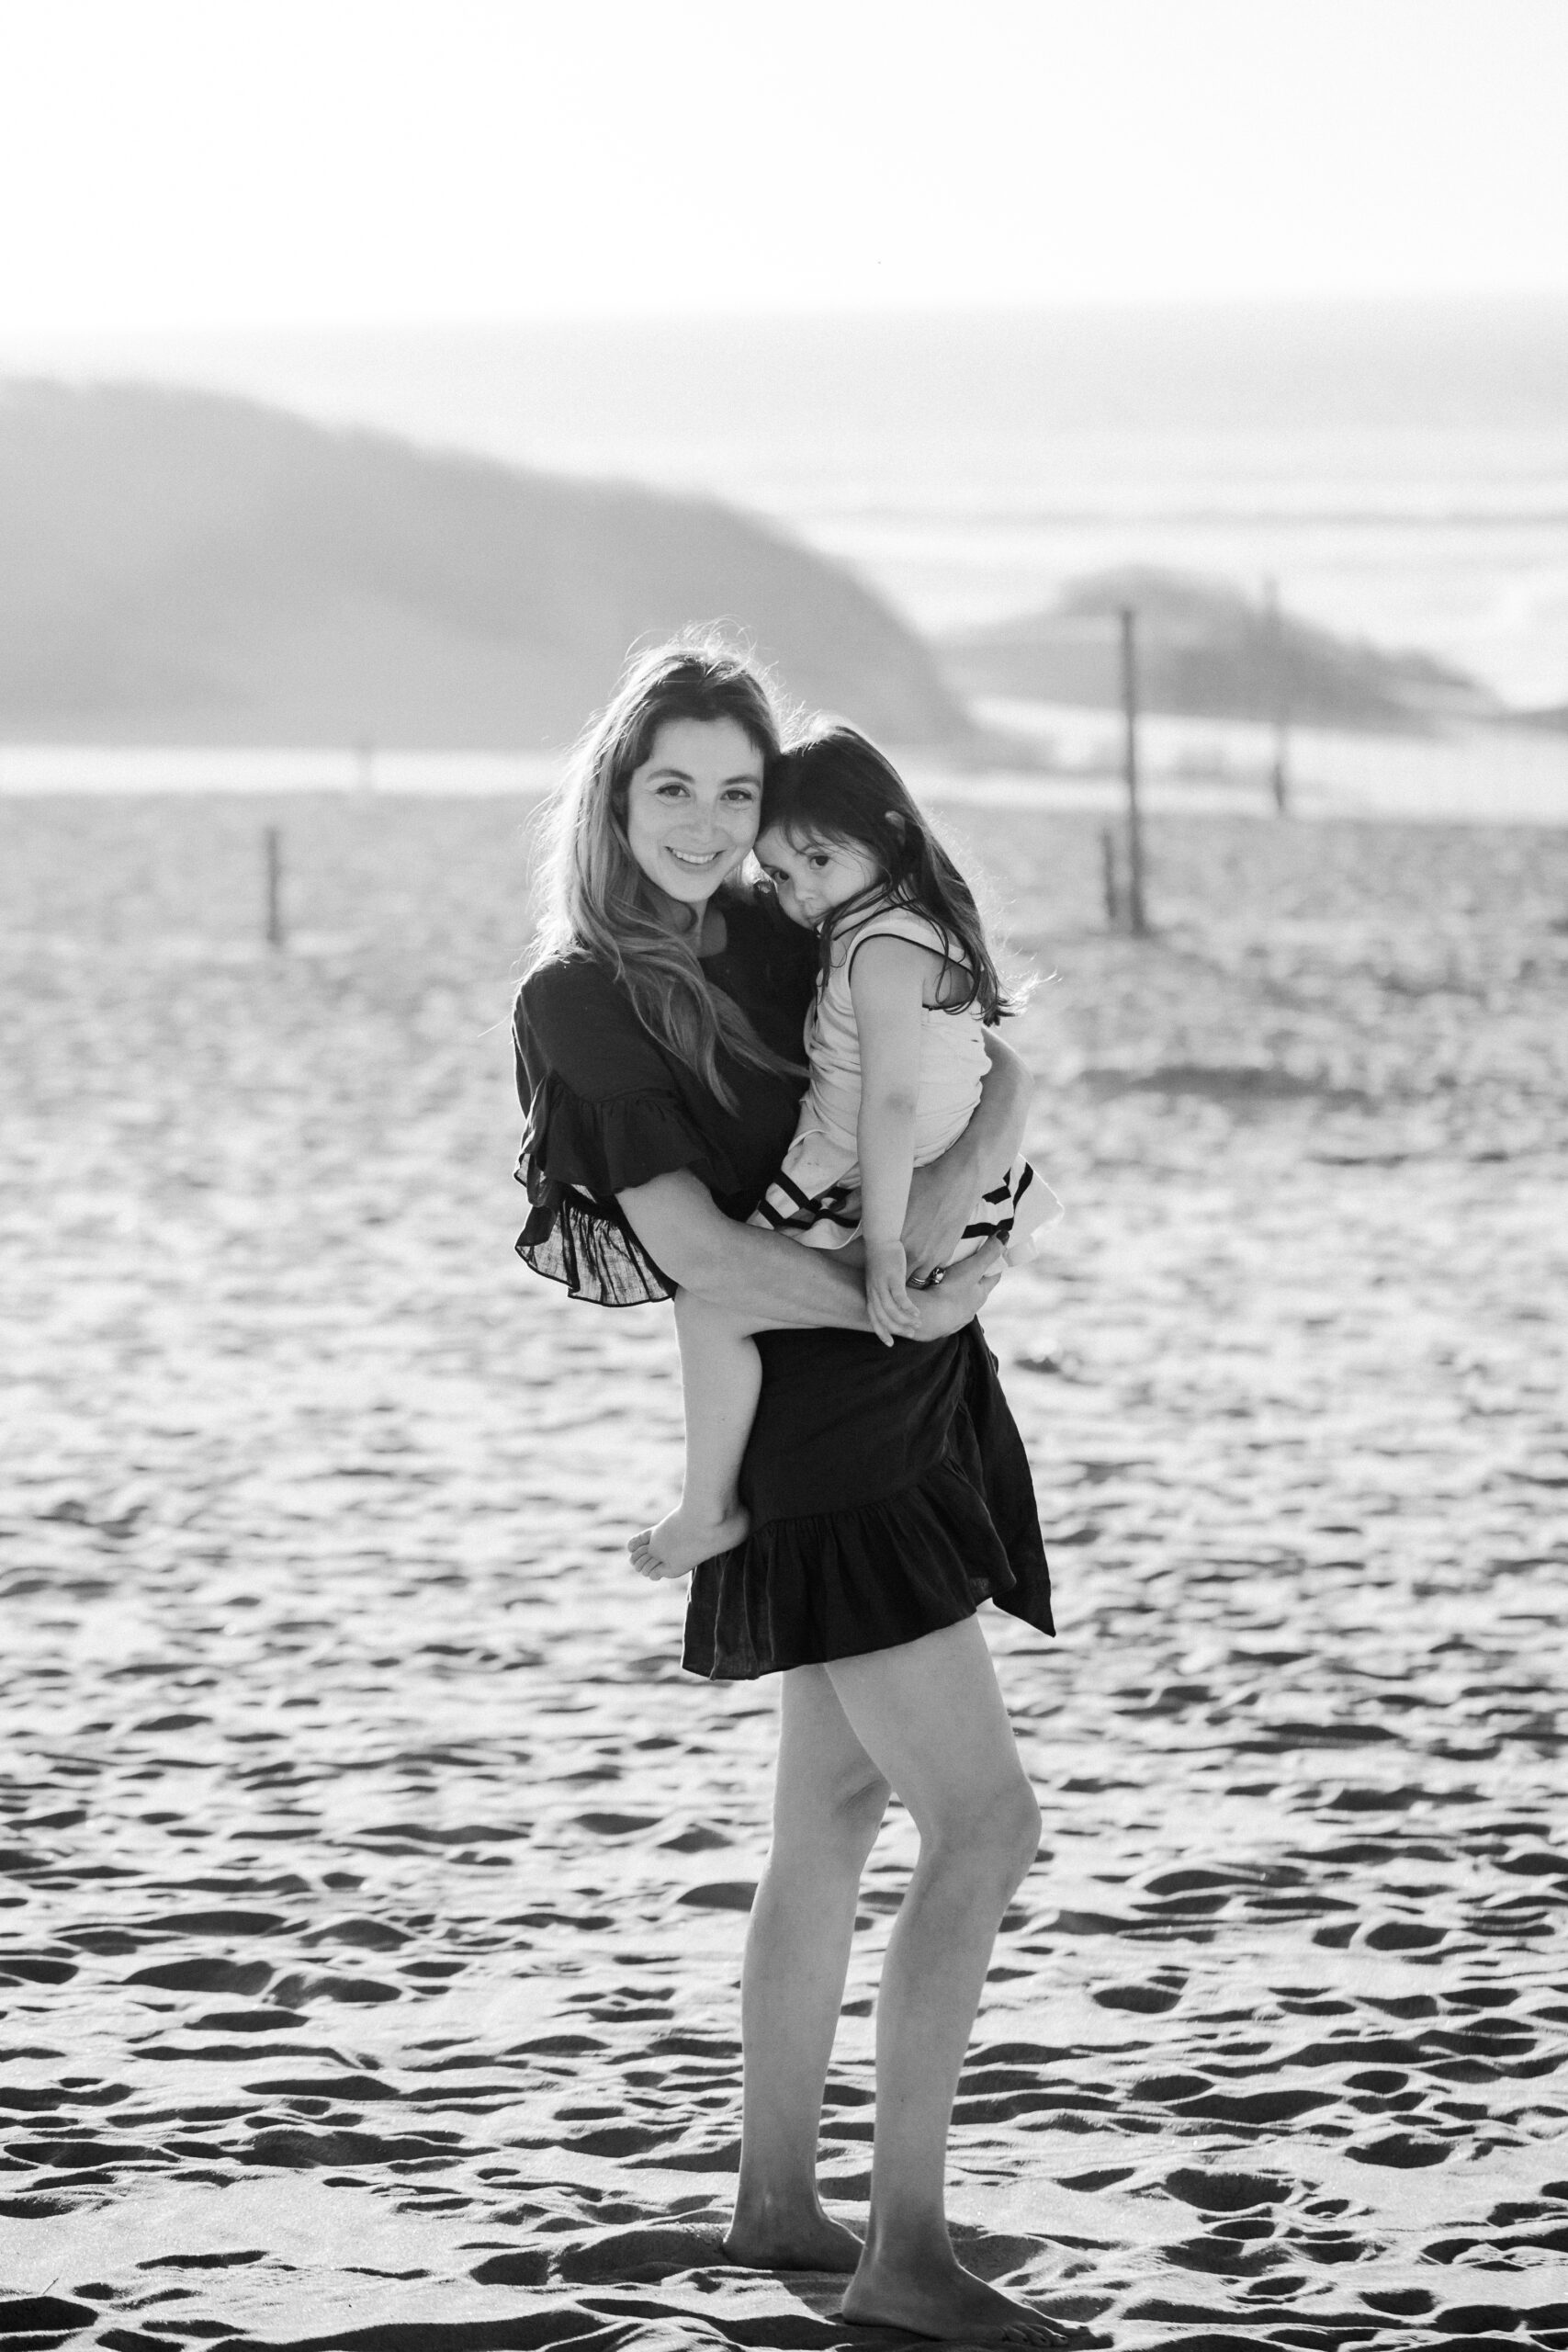 mother holding young daughter black and white image on beach